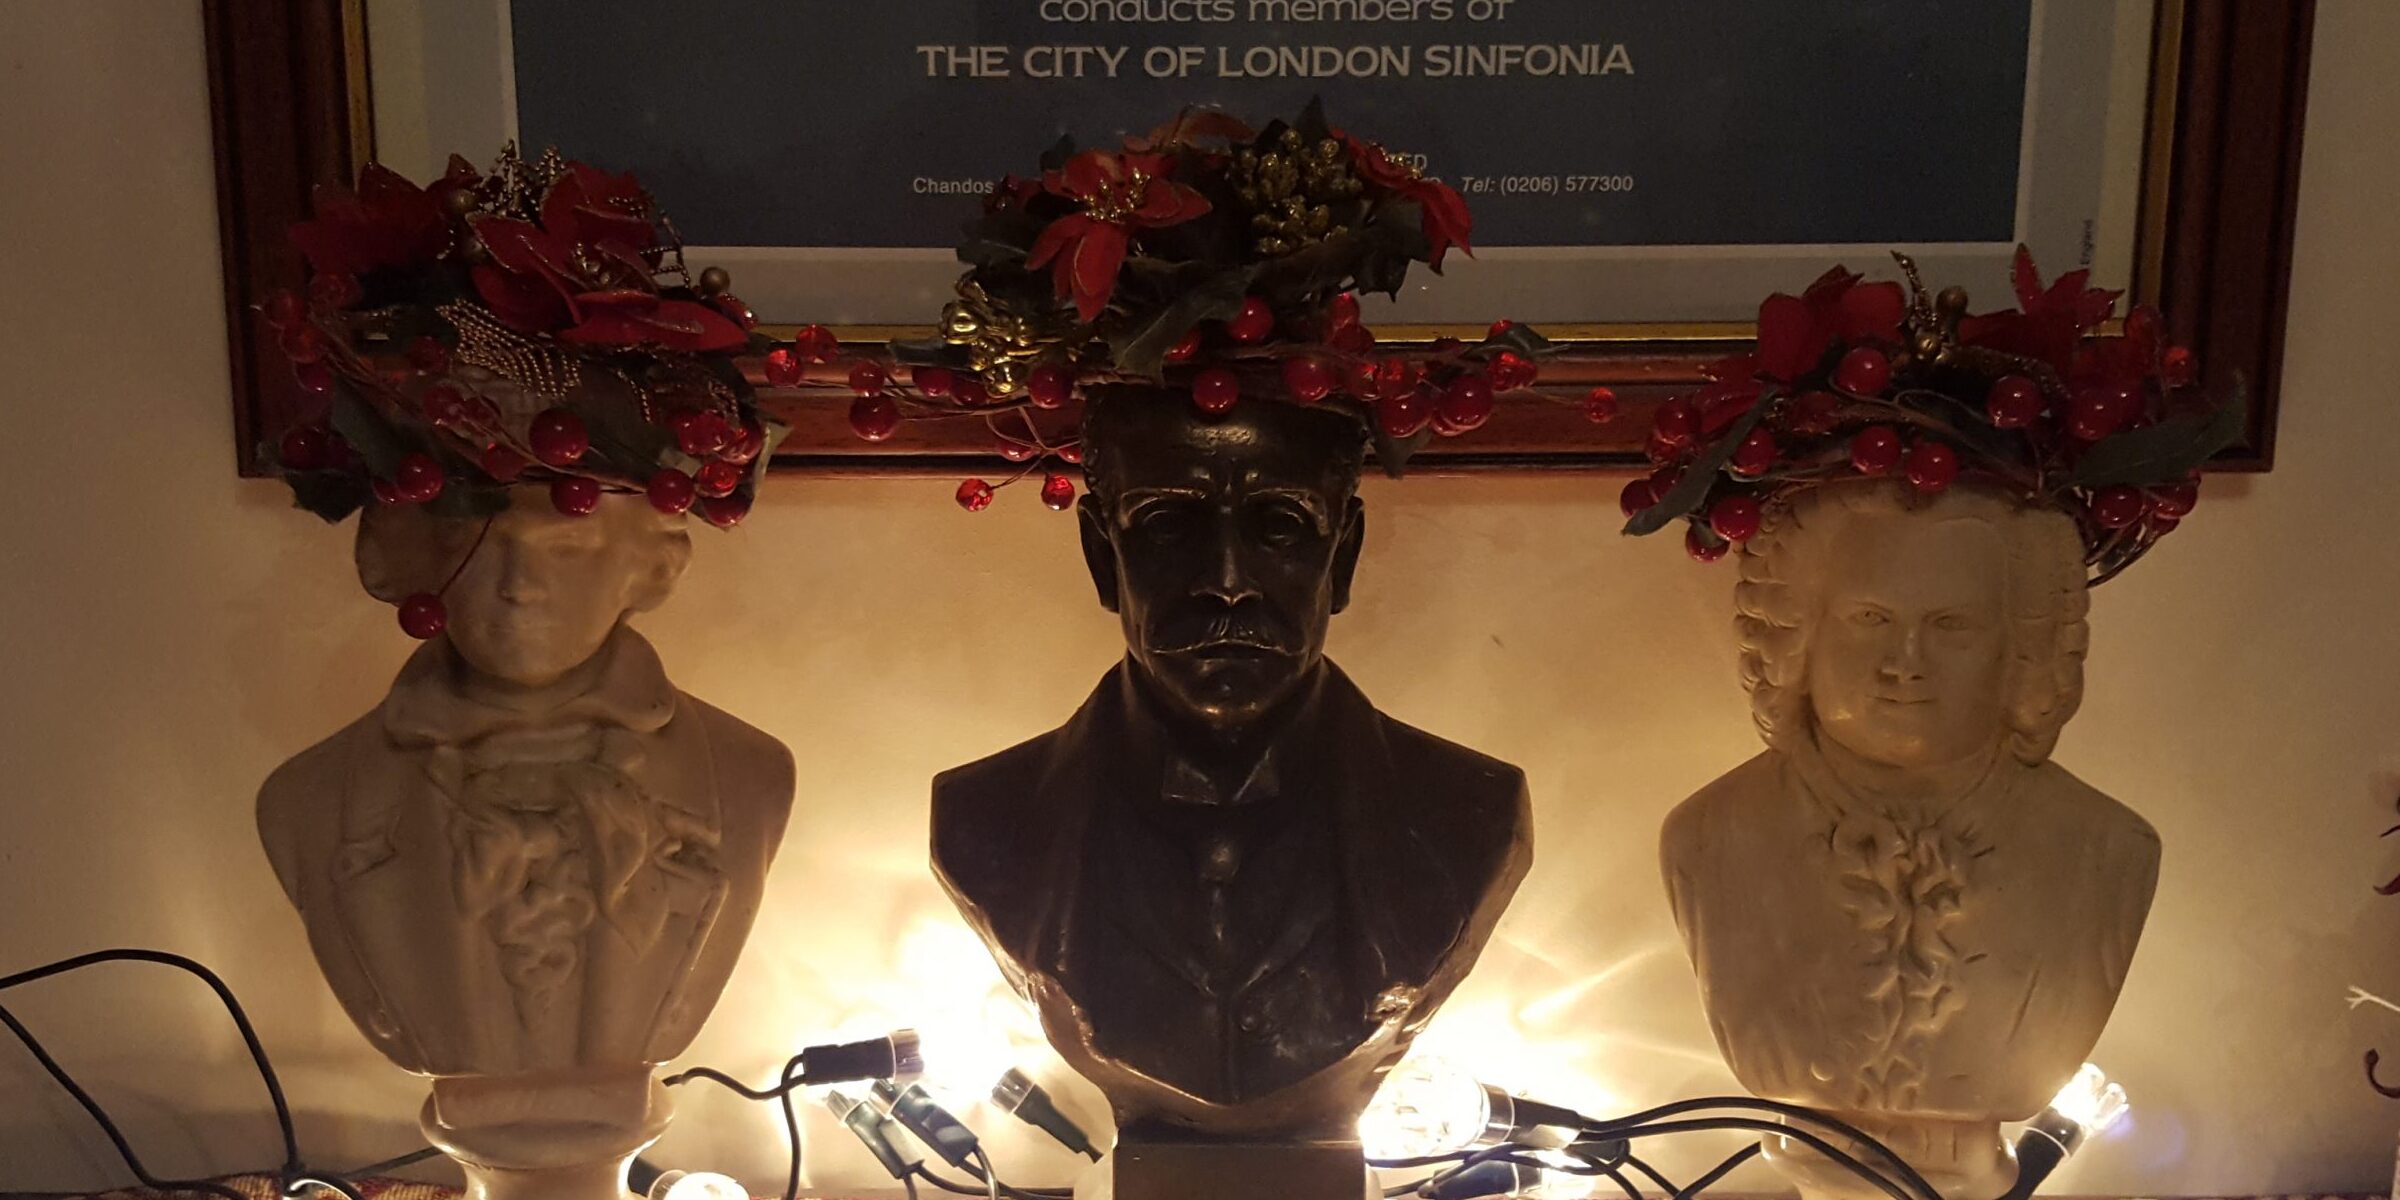 Busts of composers wearing Christmas wreaths on their heads